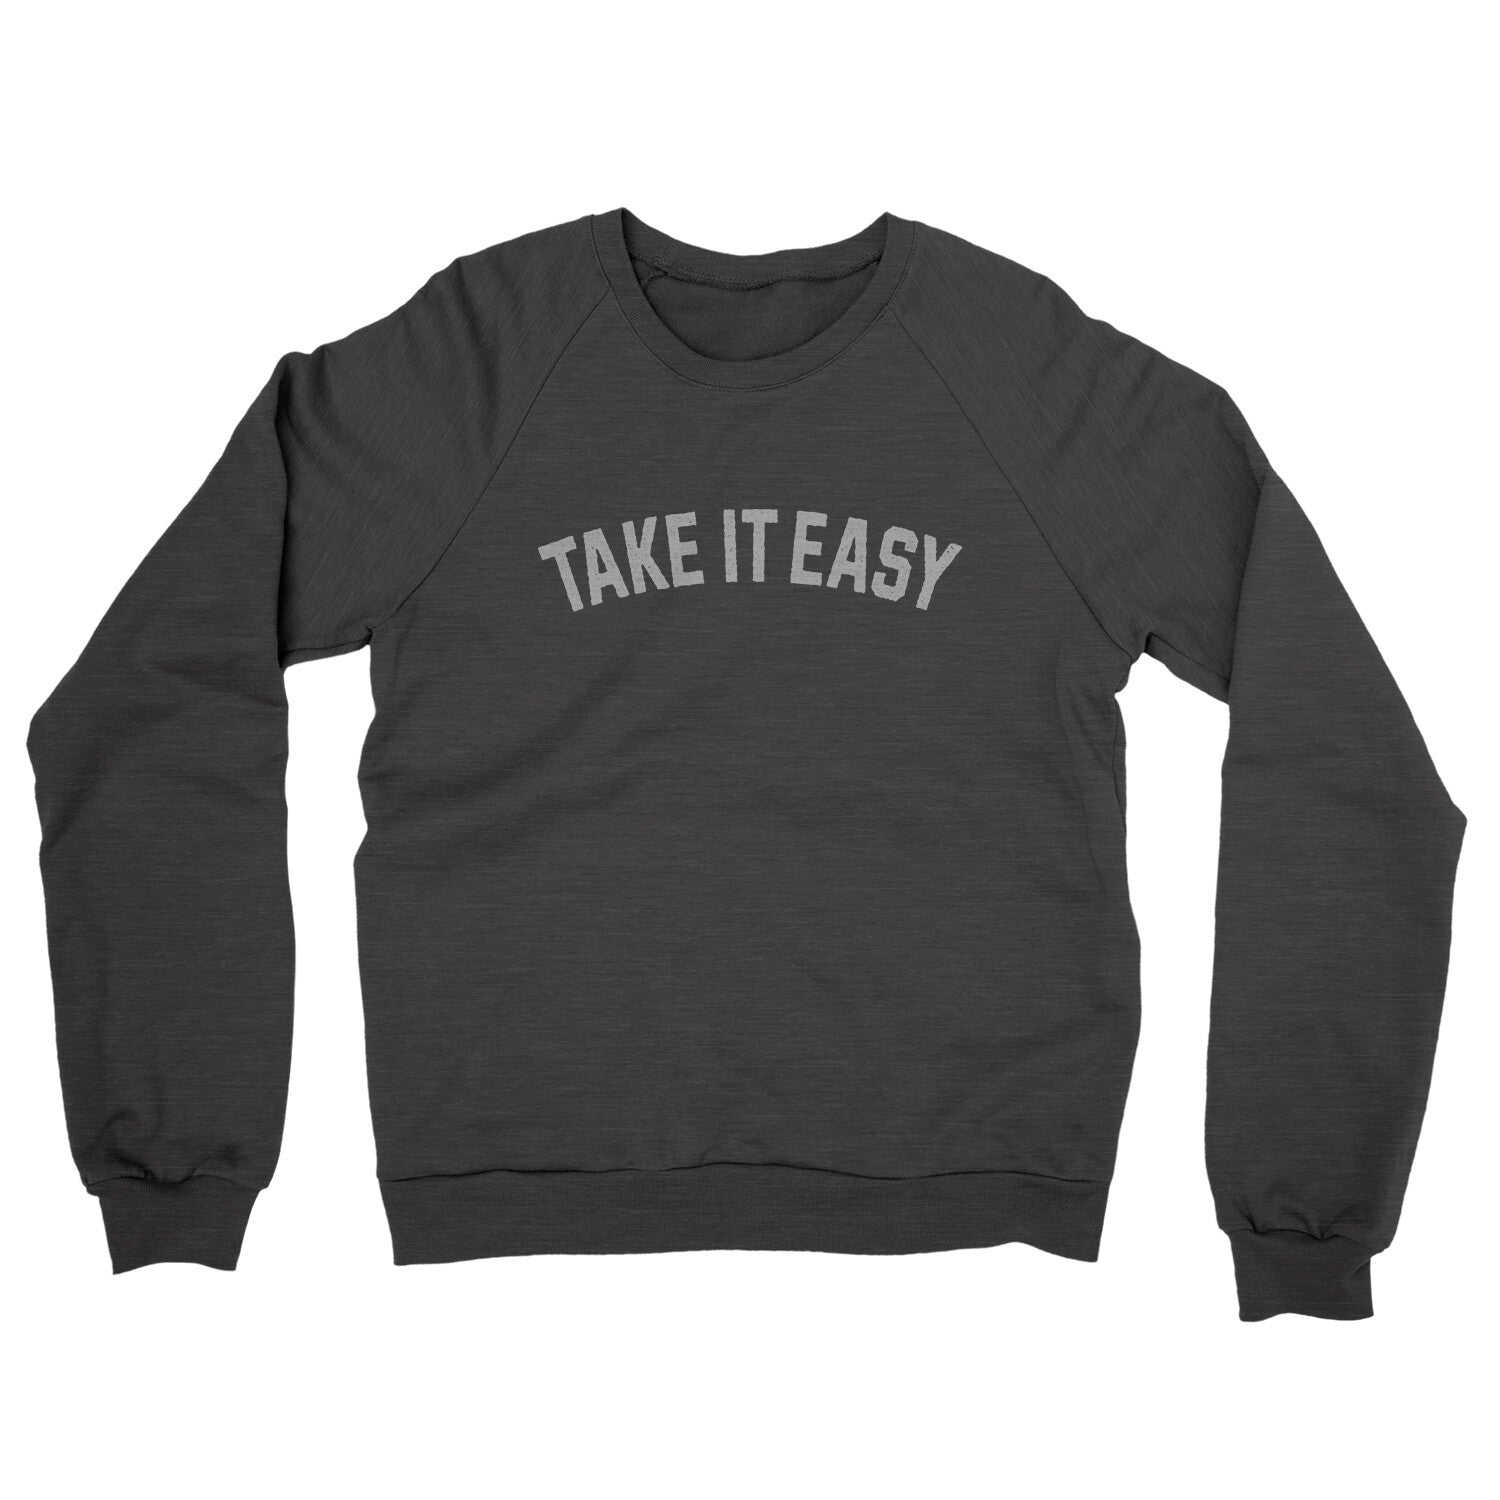 Take it Easy in Charcoal Heather Color